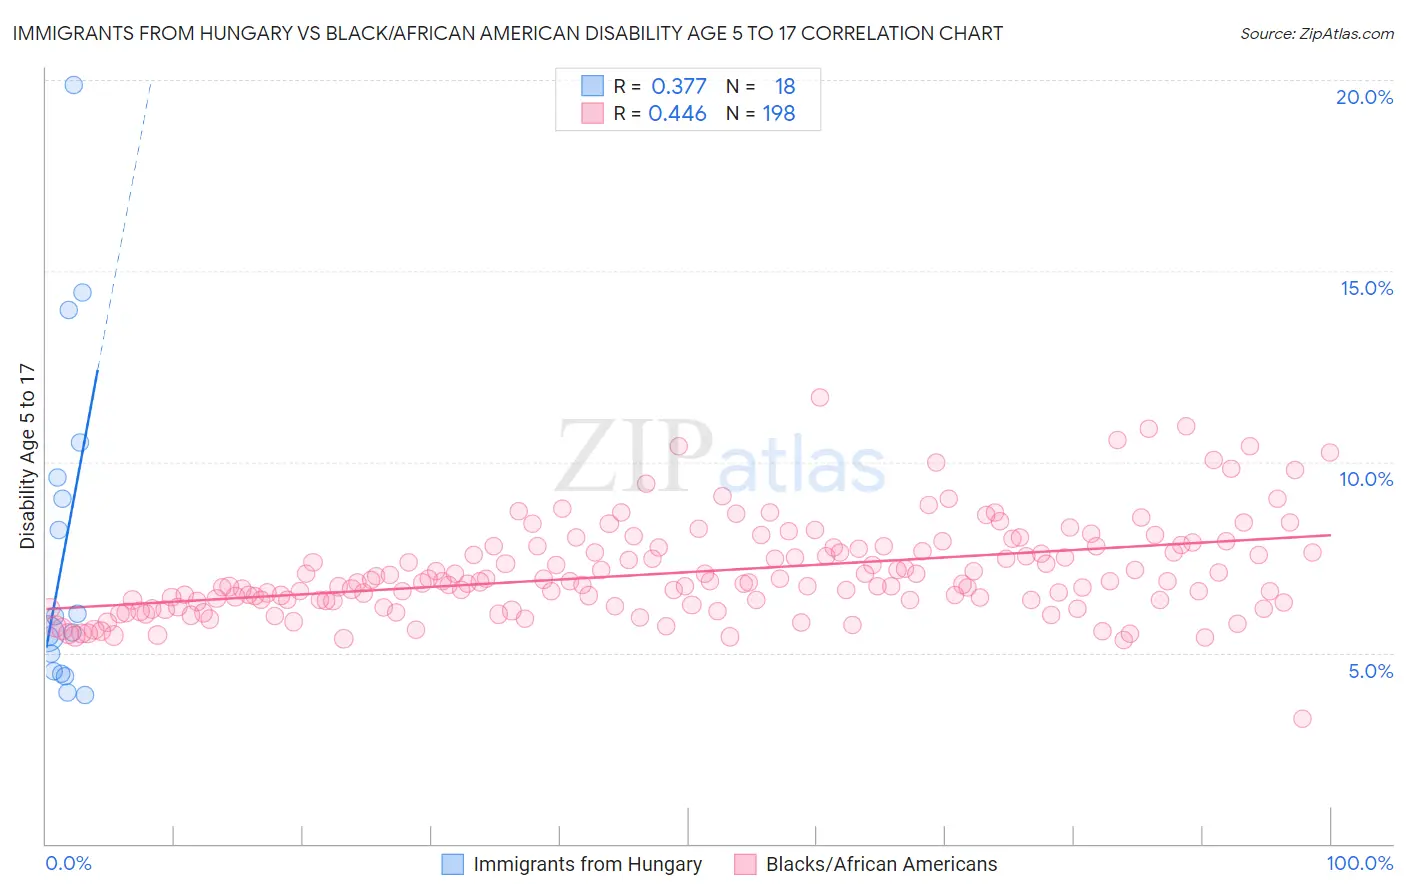 Immigrants from Hungary vs Black/African American Disability Age 5 to 17